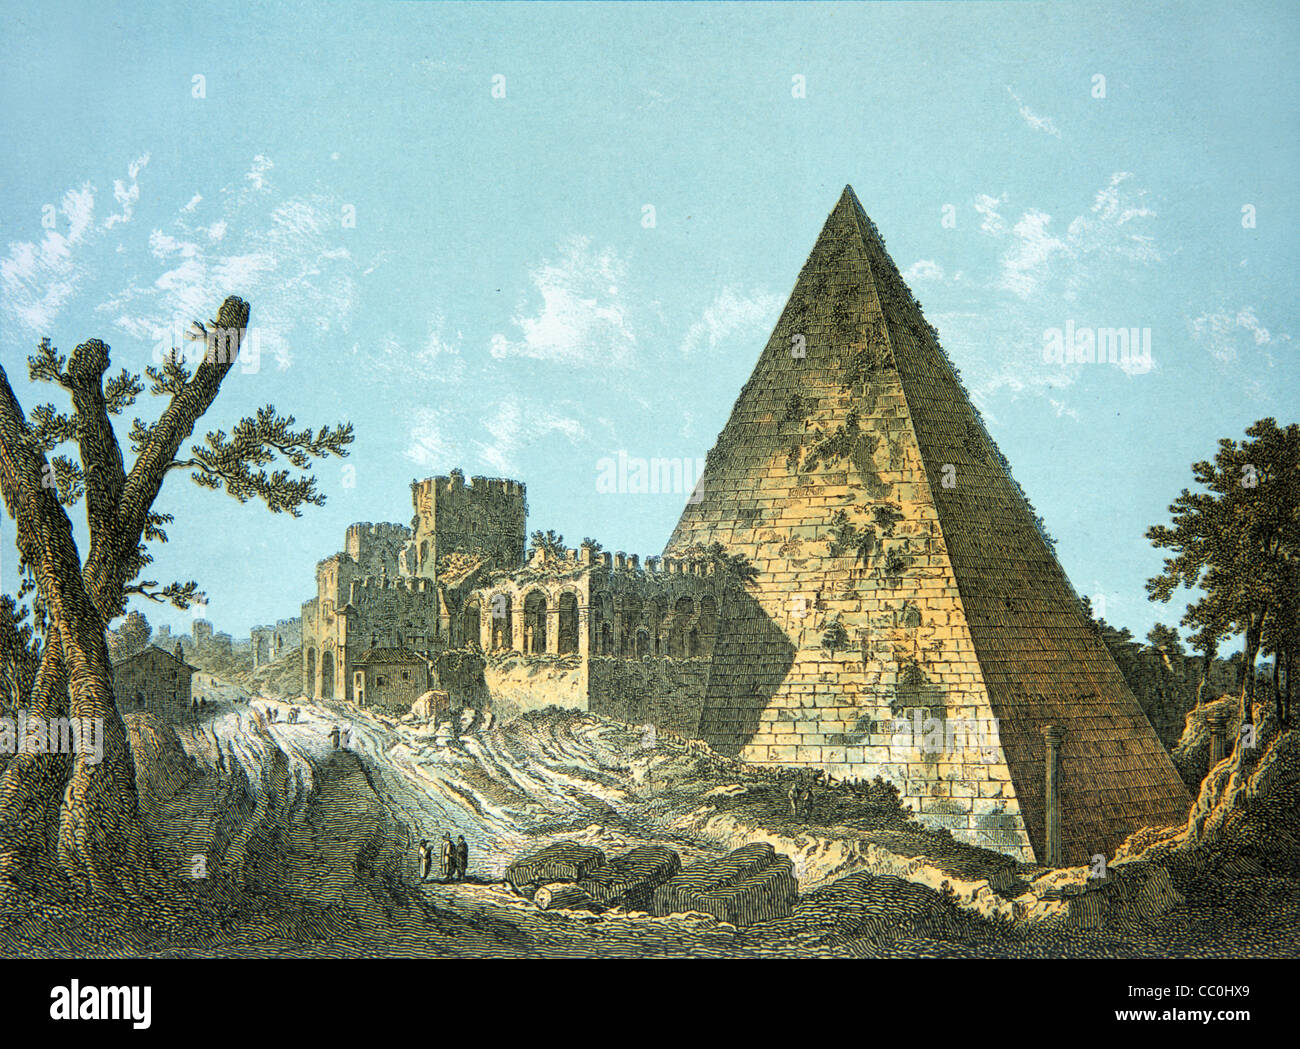 Temple and Pyramid of Gaius Cestius (c1st BC), Rome. Chromolithograph or Colour lithograph, 1882. Stock Photo